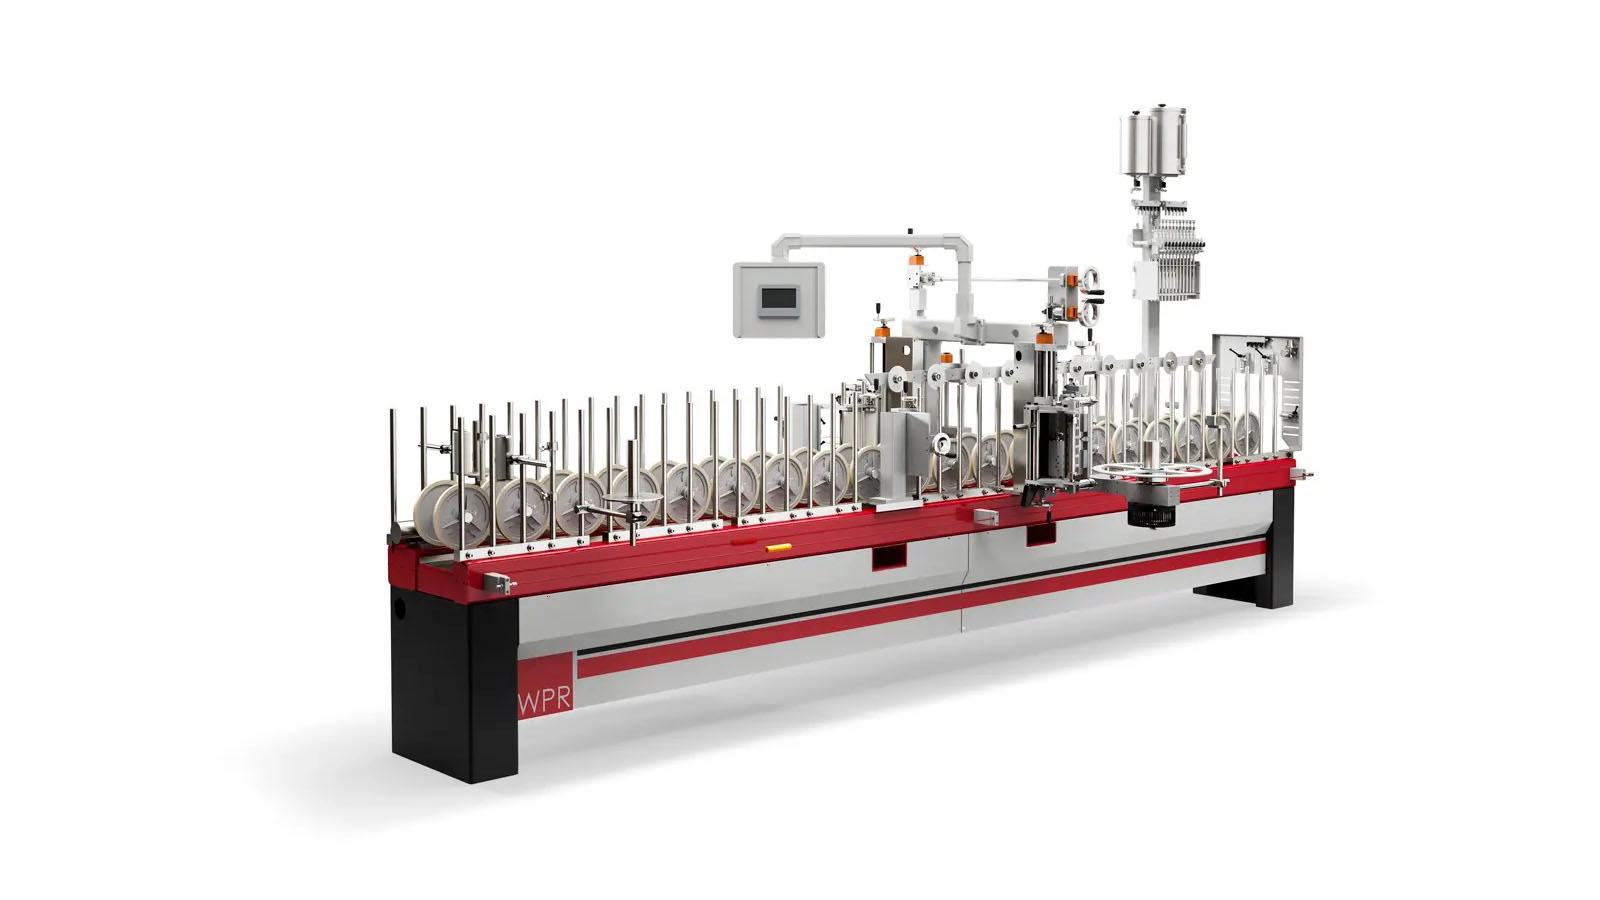 OL.D.200.4500: Double-sided in-line profile lamination machine